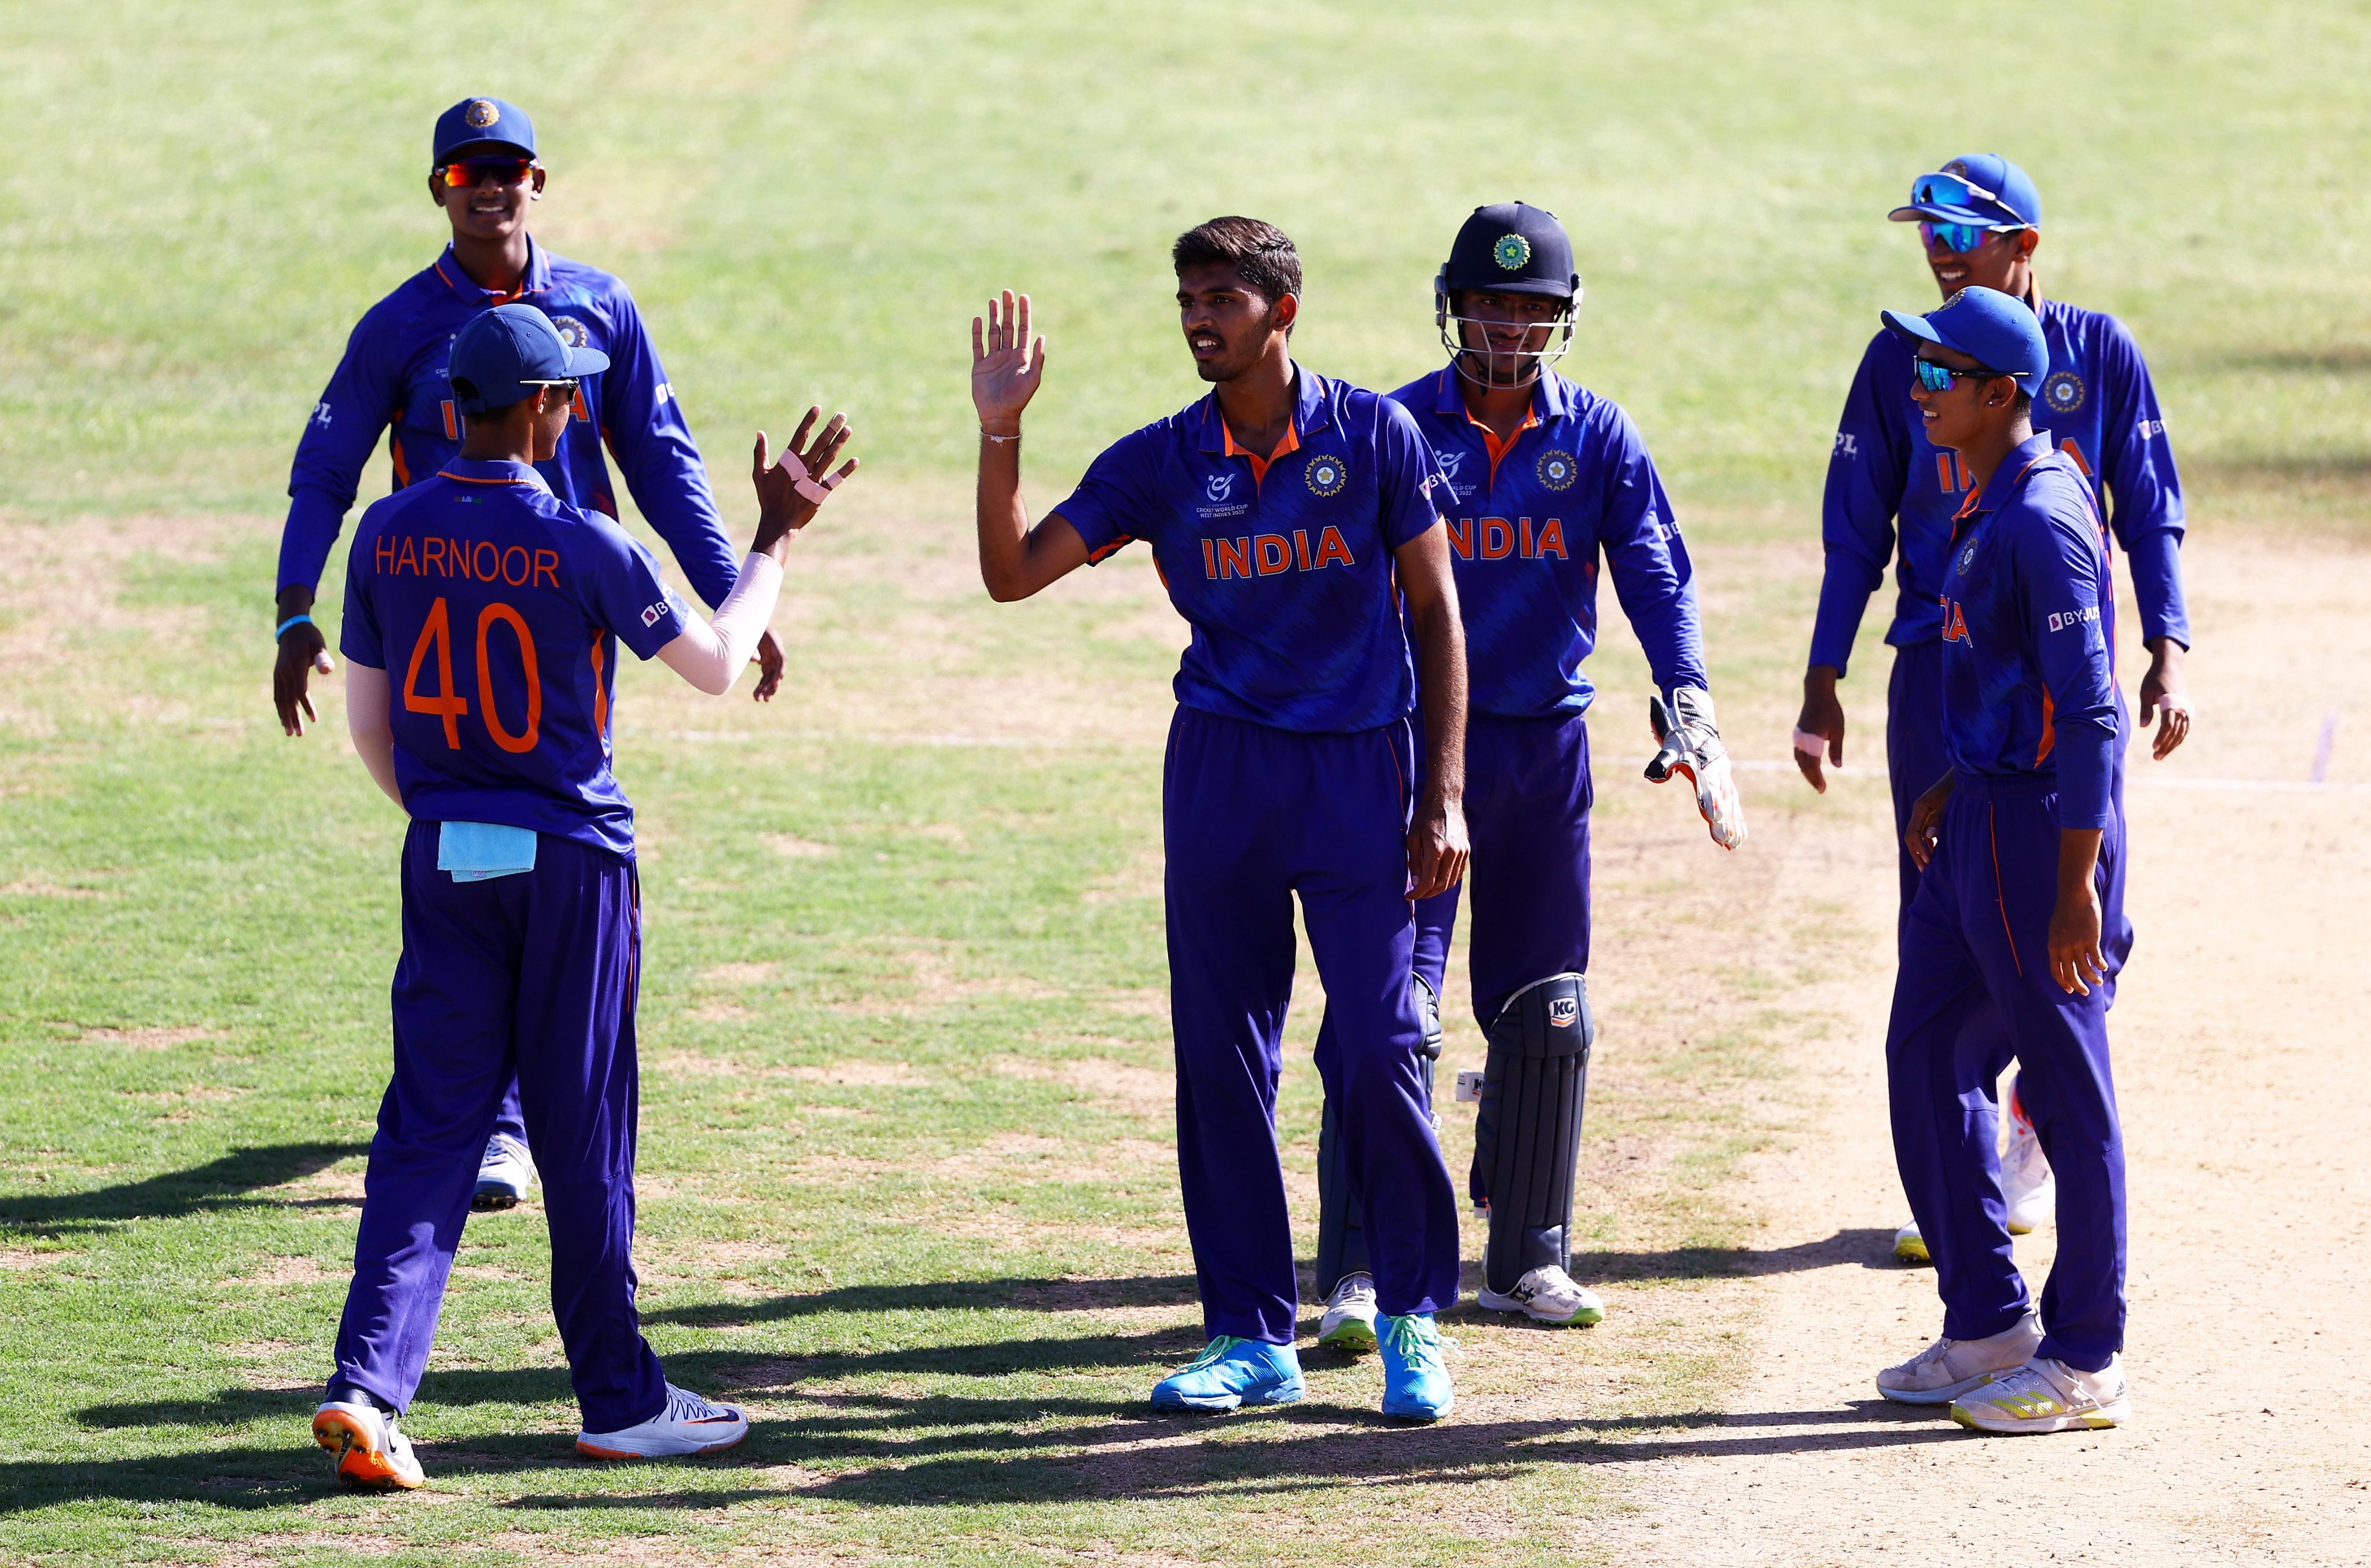 India were peerless with spin, with Vicky Ostwal the stand-out bowler. Credit: PTI Photo